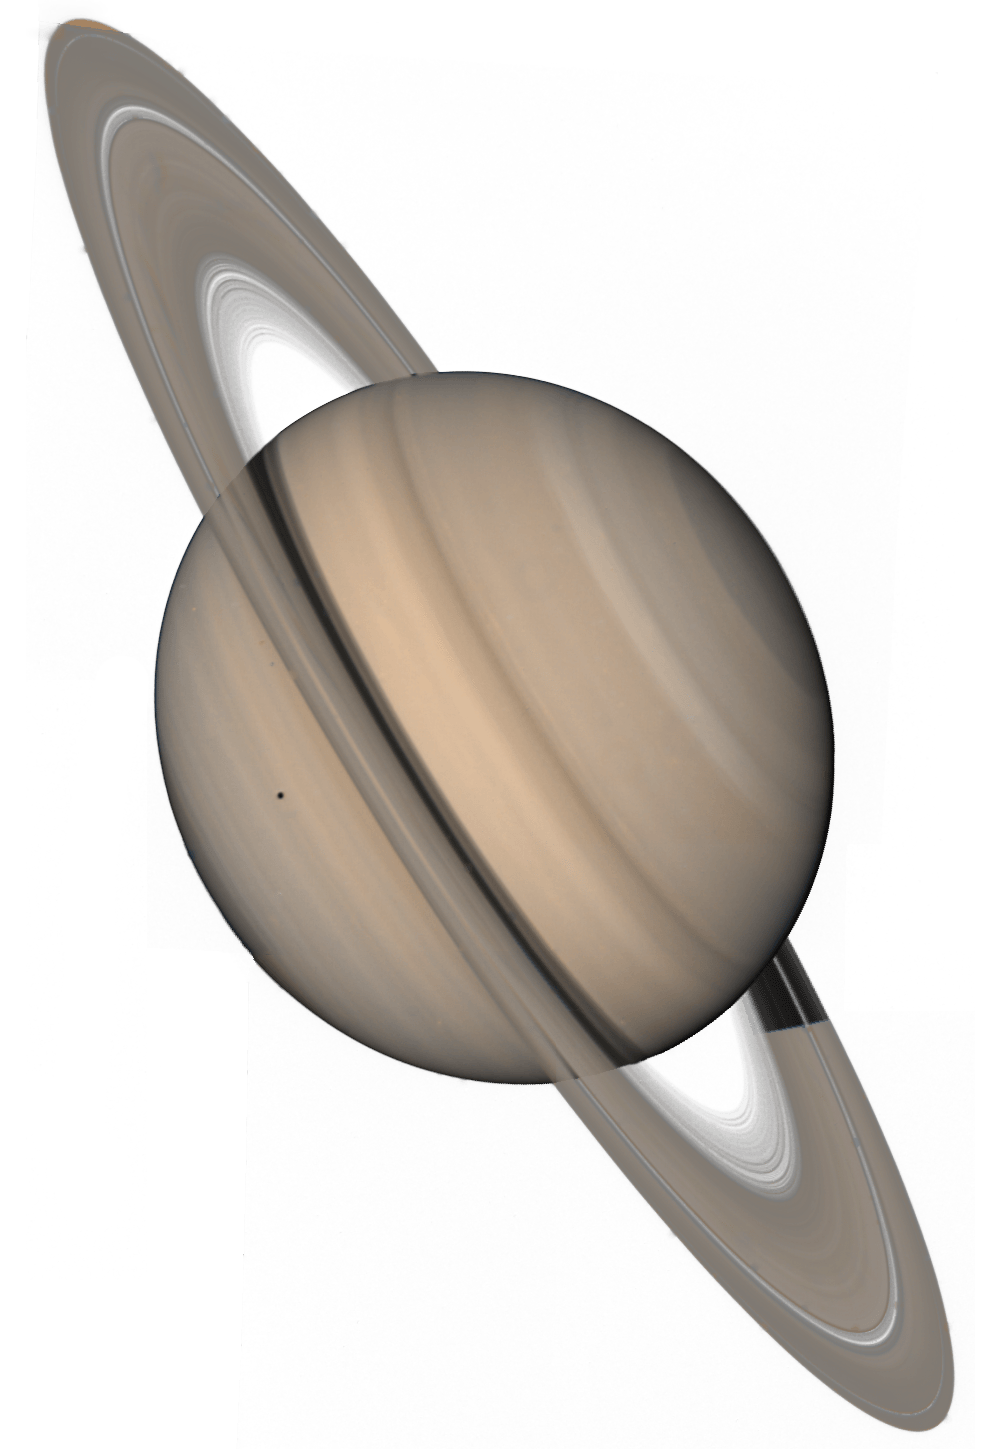 Planet Saturn associated with the numerology of 71